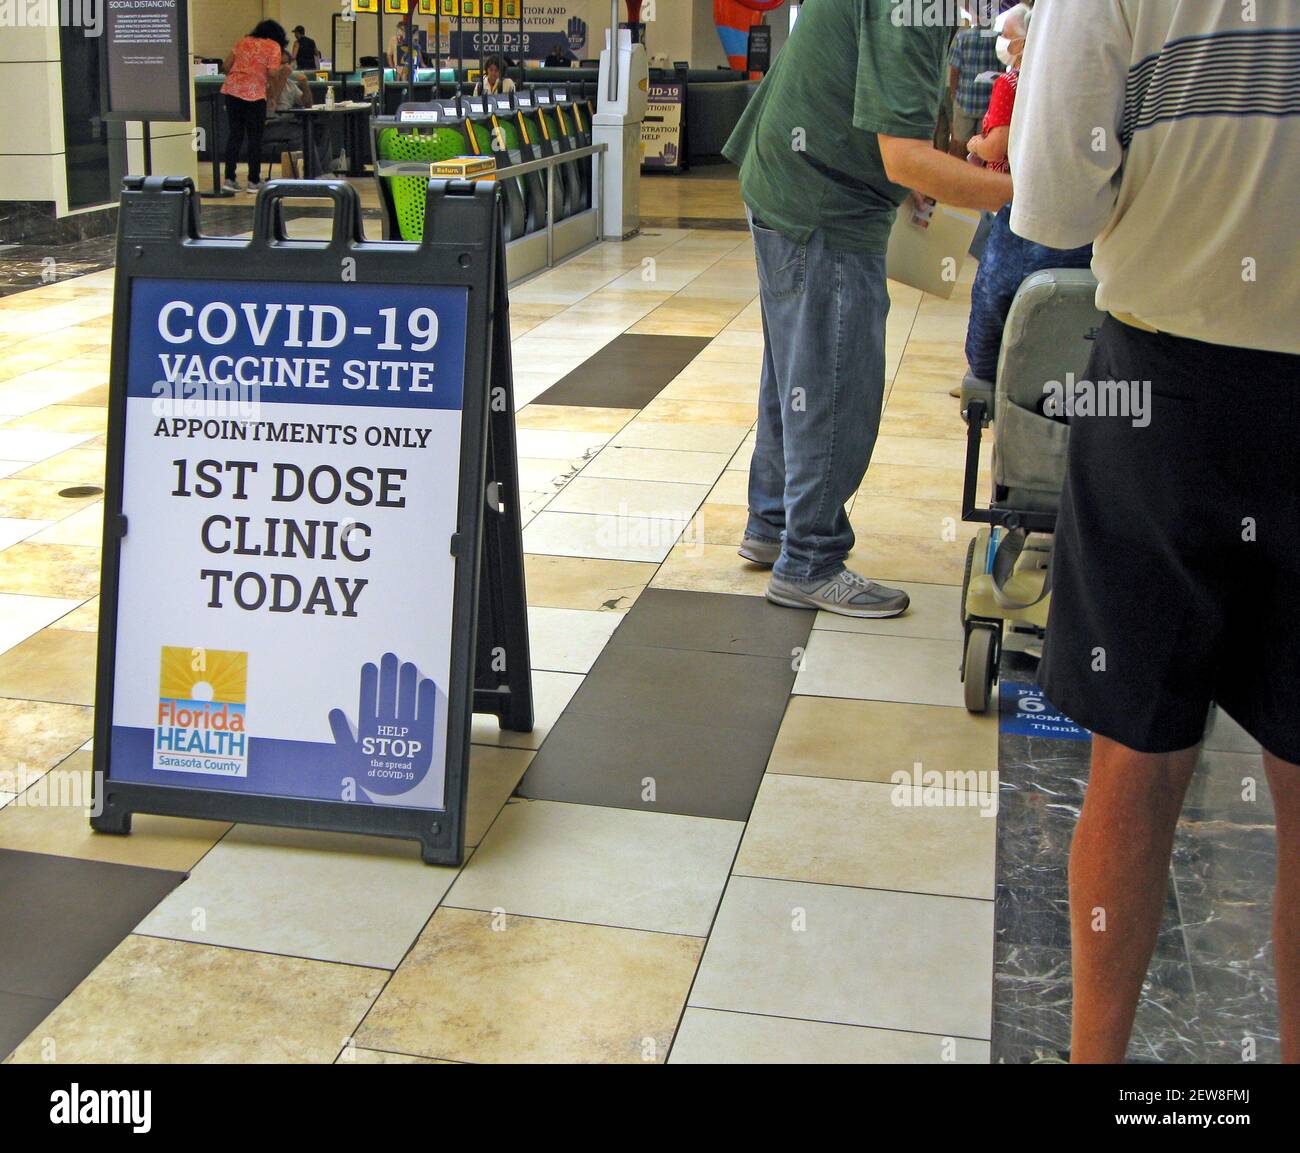 American seniors age 65 or older line up in a shopping mall during the initial wave of Covid-19 coronavirus vaccinations organized by the Department of Health of Sarasota County on the west coast of Florida, USA. Appointments made online or by telephone were required for the 1st dose of the two-shot Moderna vaccine, which also required a 2nd dose four weeks later. The county health department had injected doses of the vaccine into the upper arms of more than 50,000 people by March, 2021, one year after this global pandemic was declared by the World Health Organization (WHO). Stock Photo